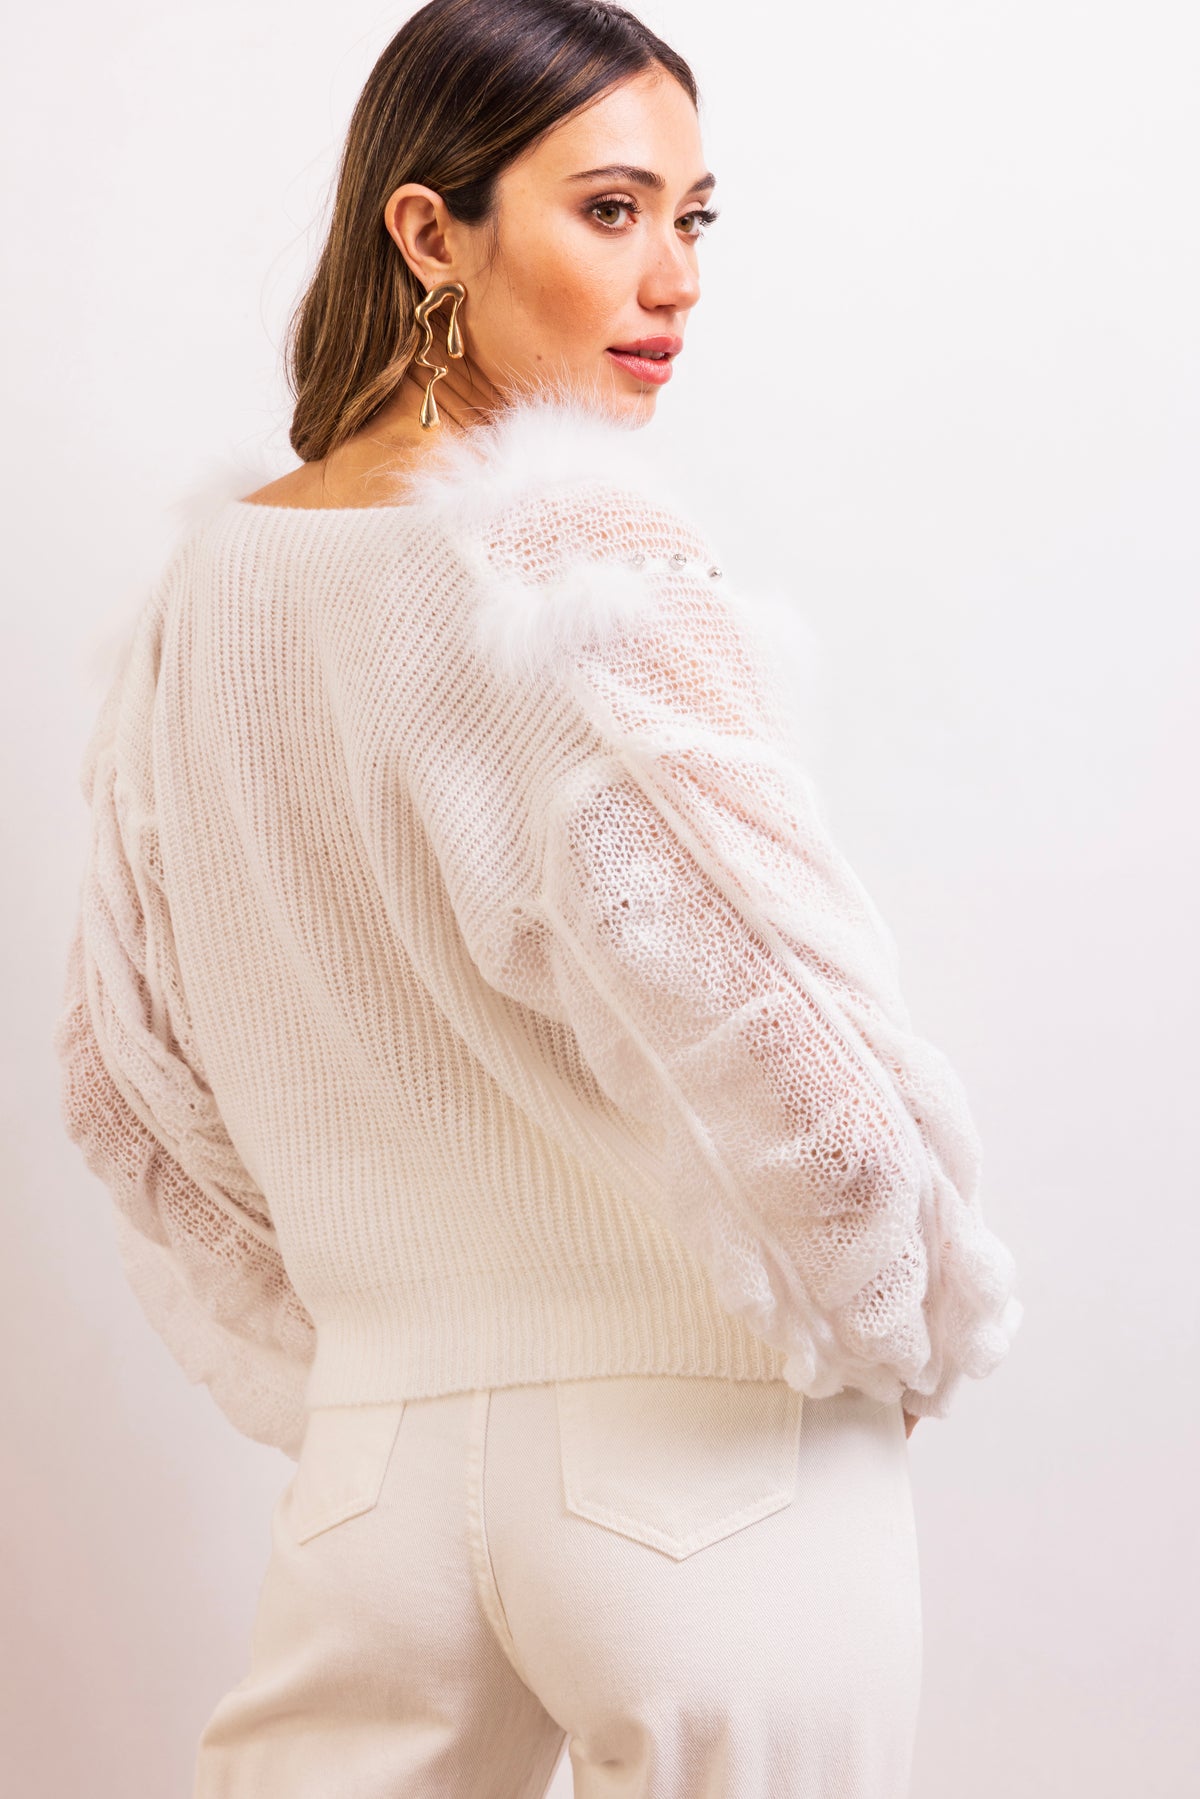 My Favor Embellished Wool Sweater in White